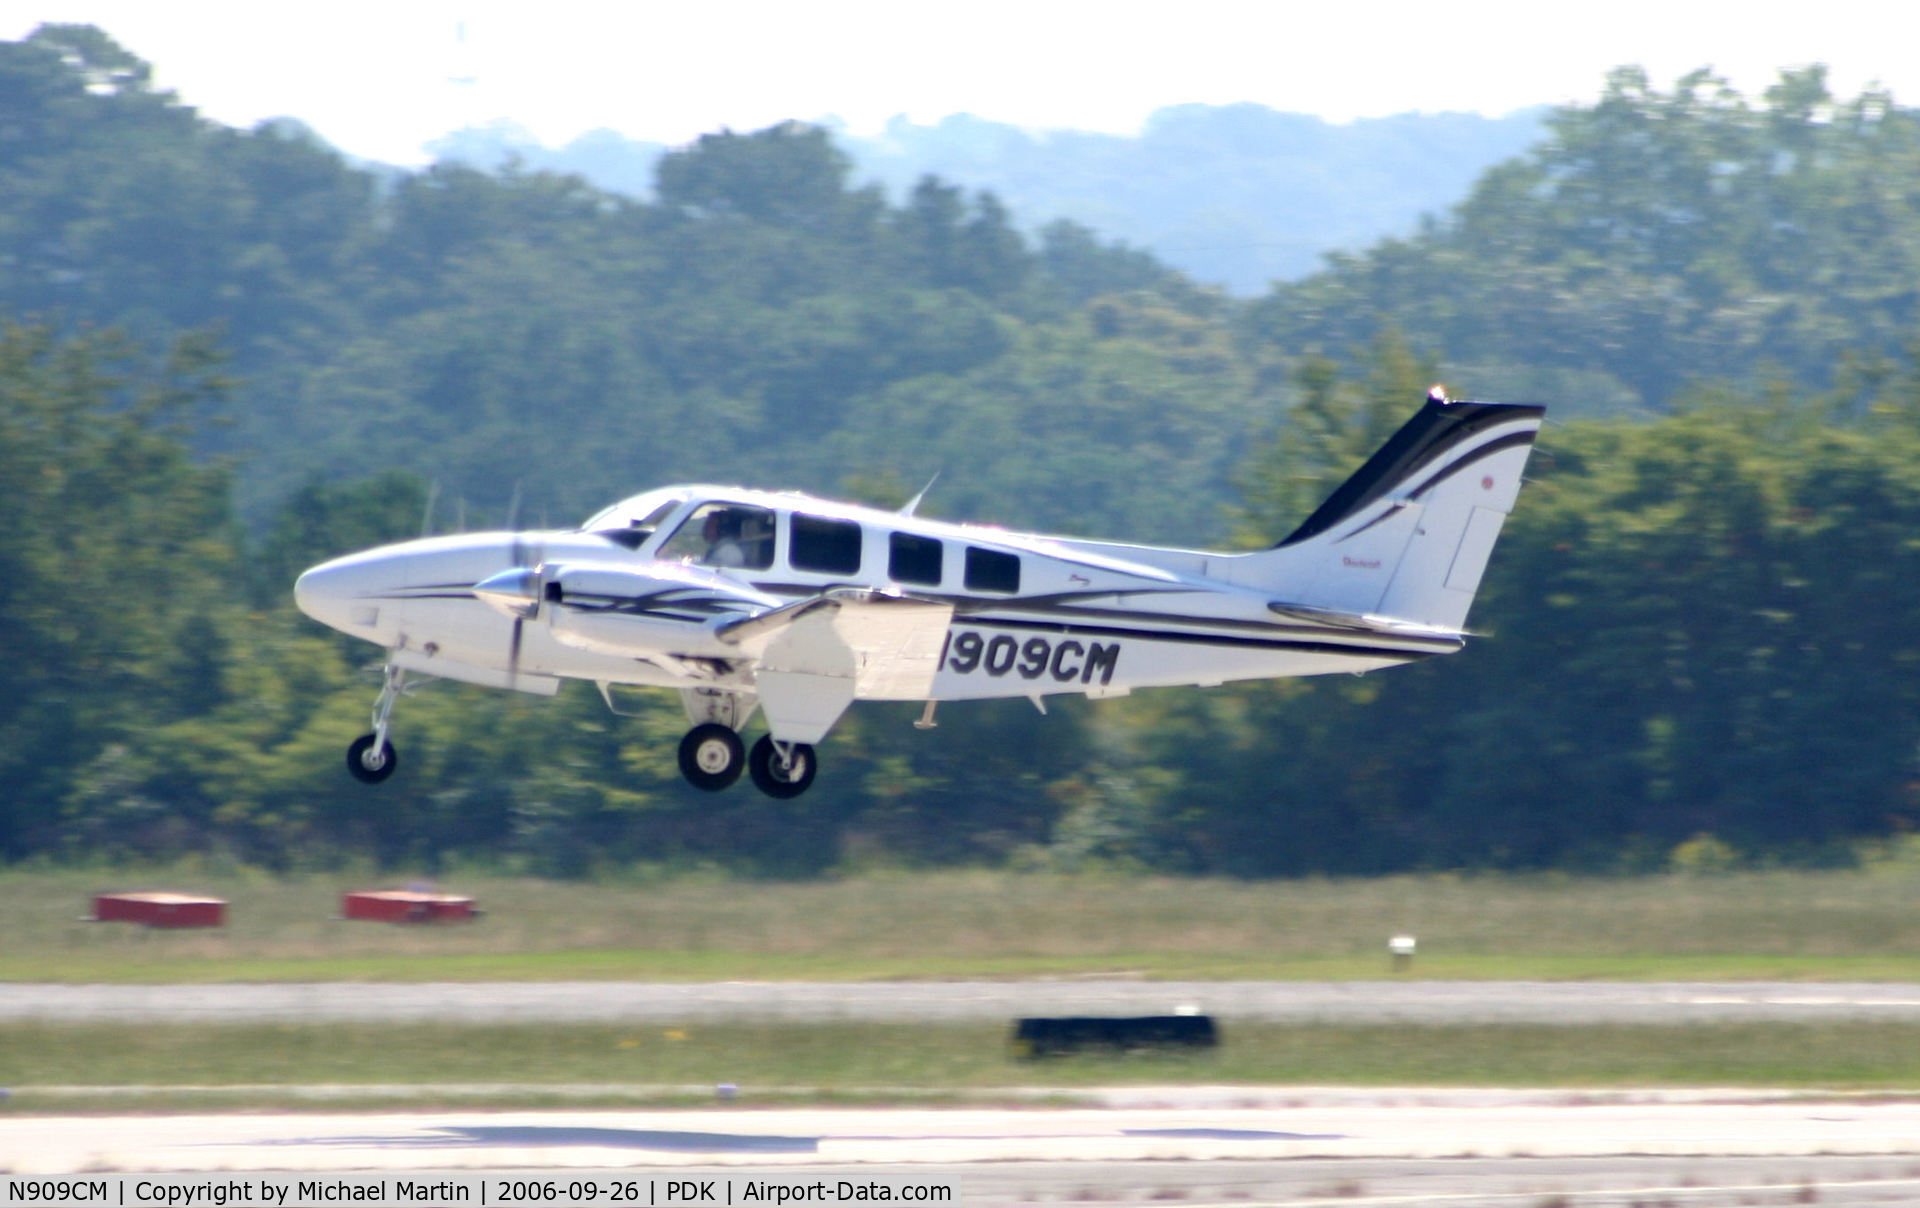 N909CM, 2001 Raytheon Aircraft Company 58 C/N TH-2022, Departing PDK on round trip mission